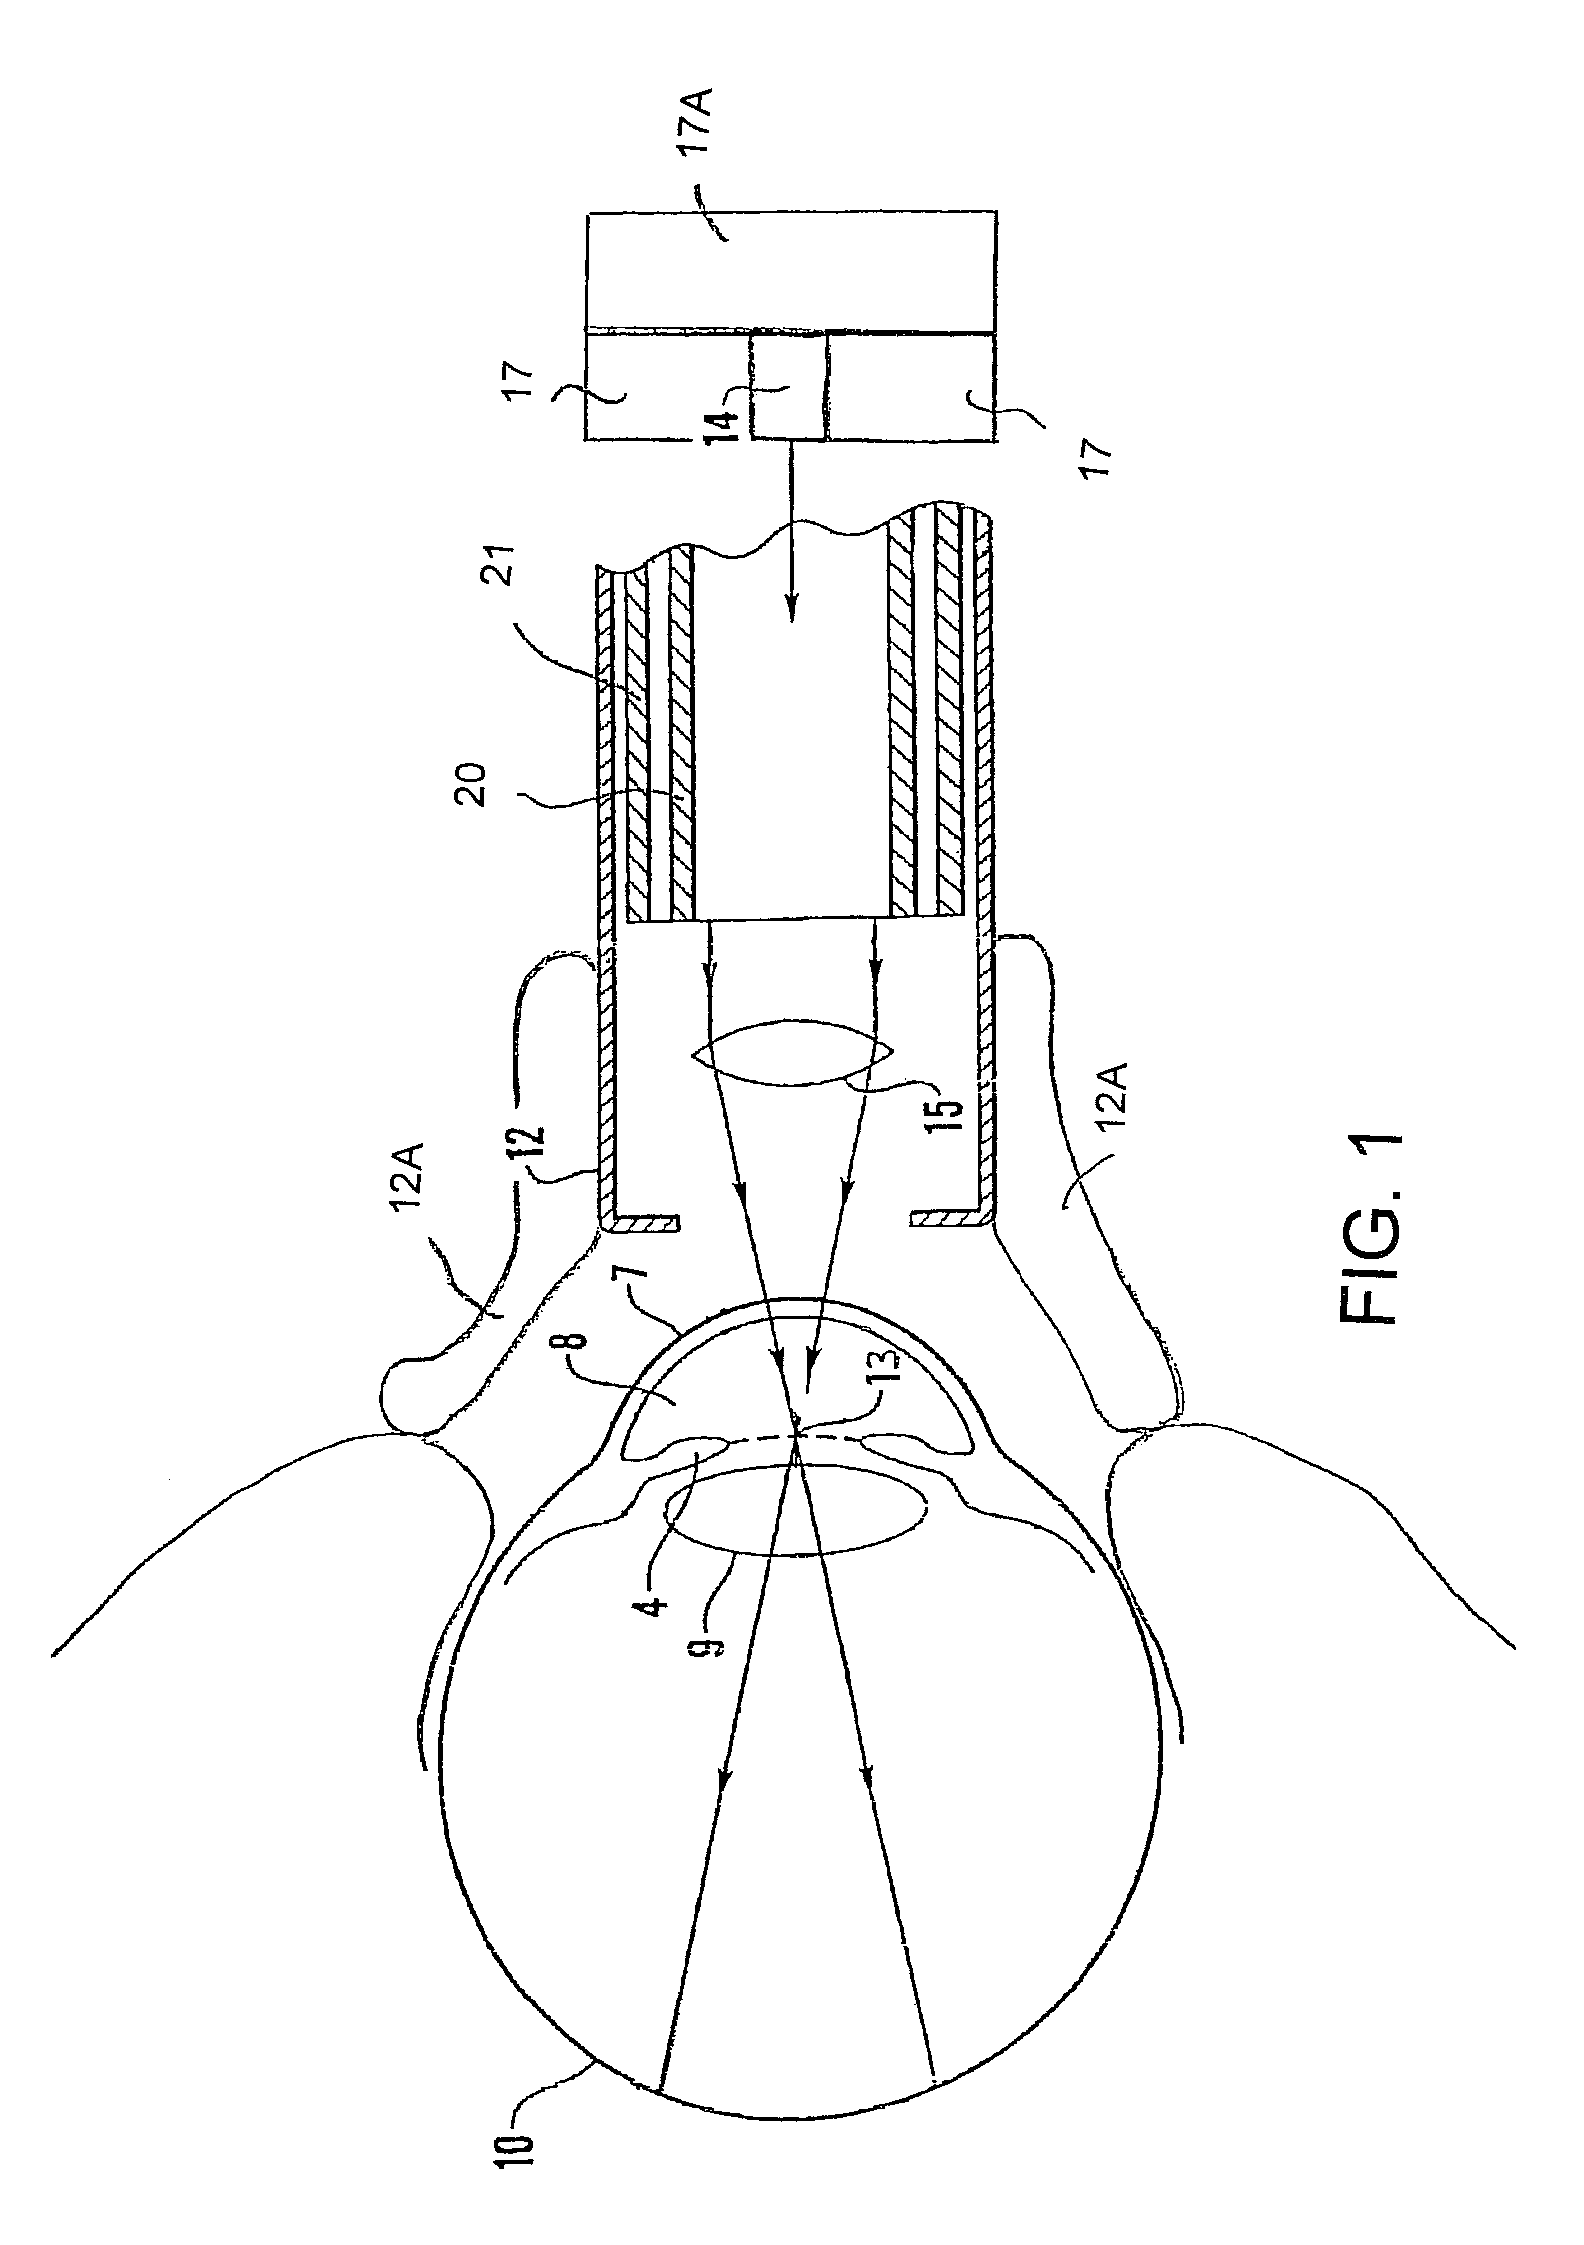 Device for monitoring body functions